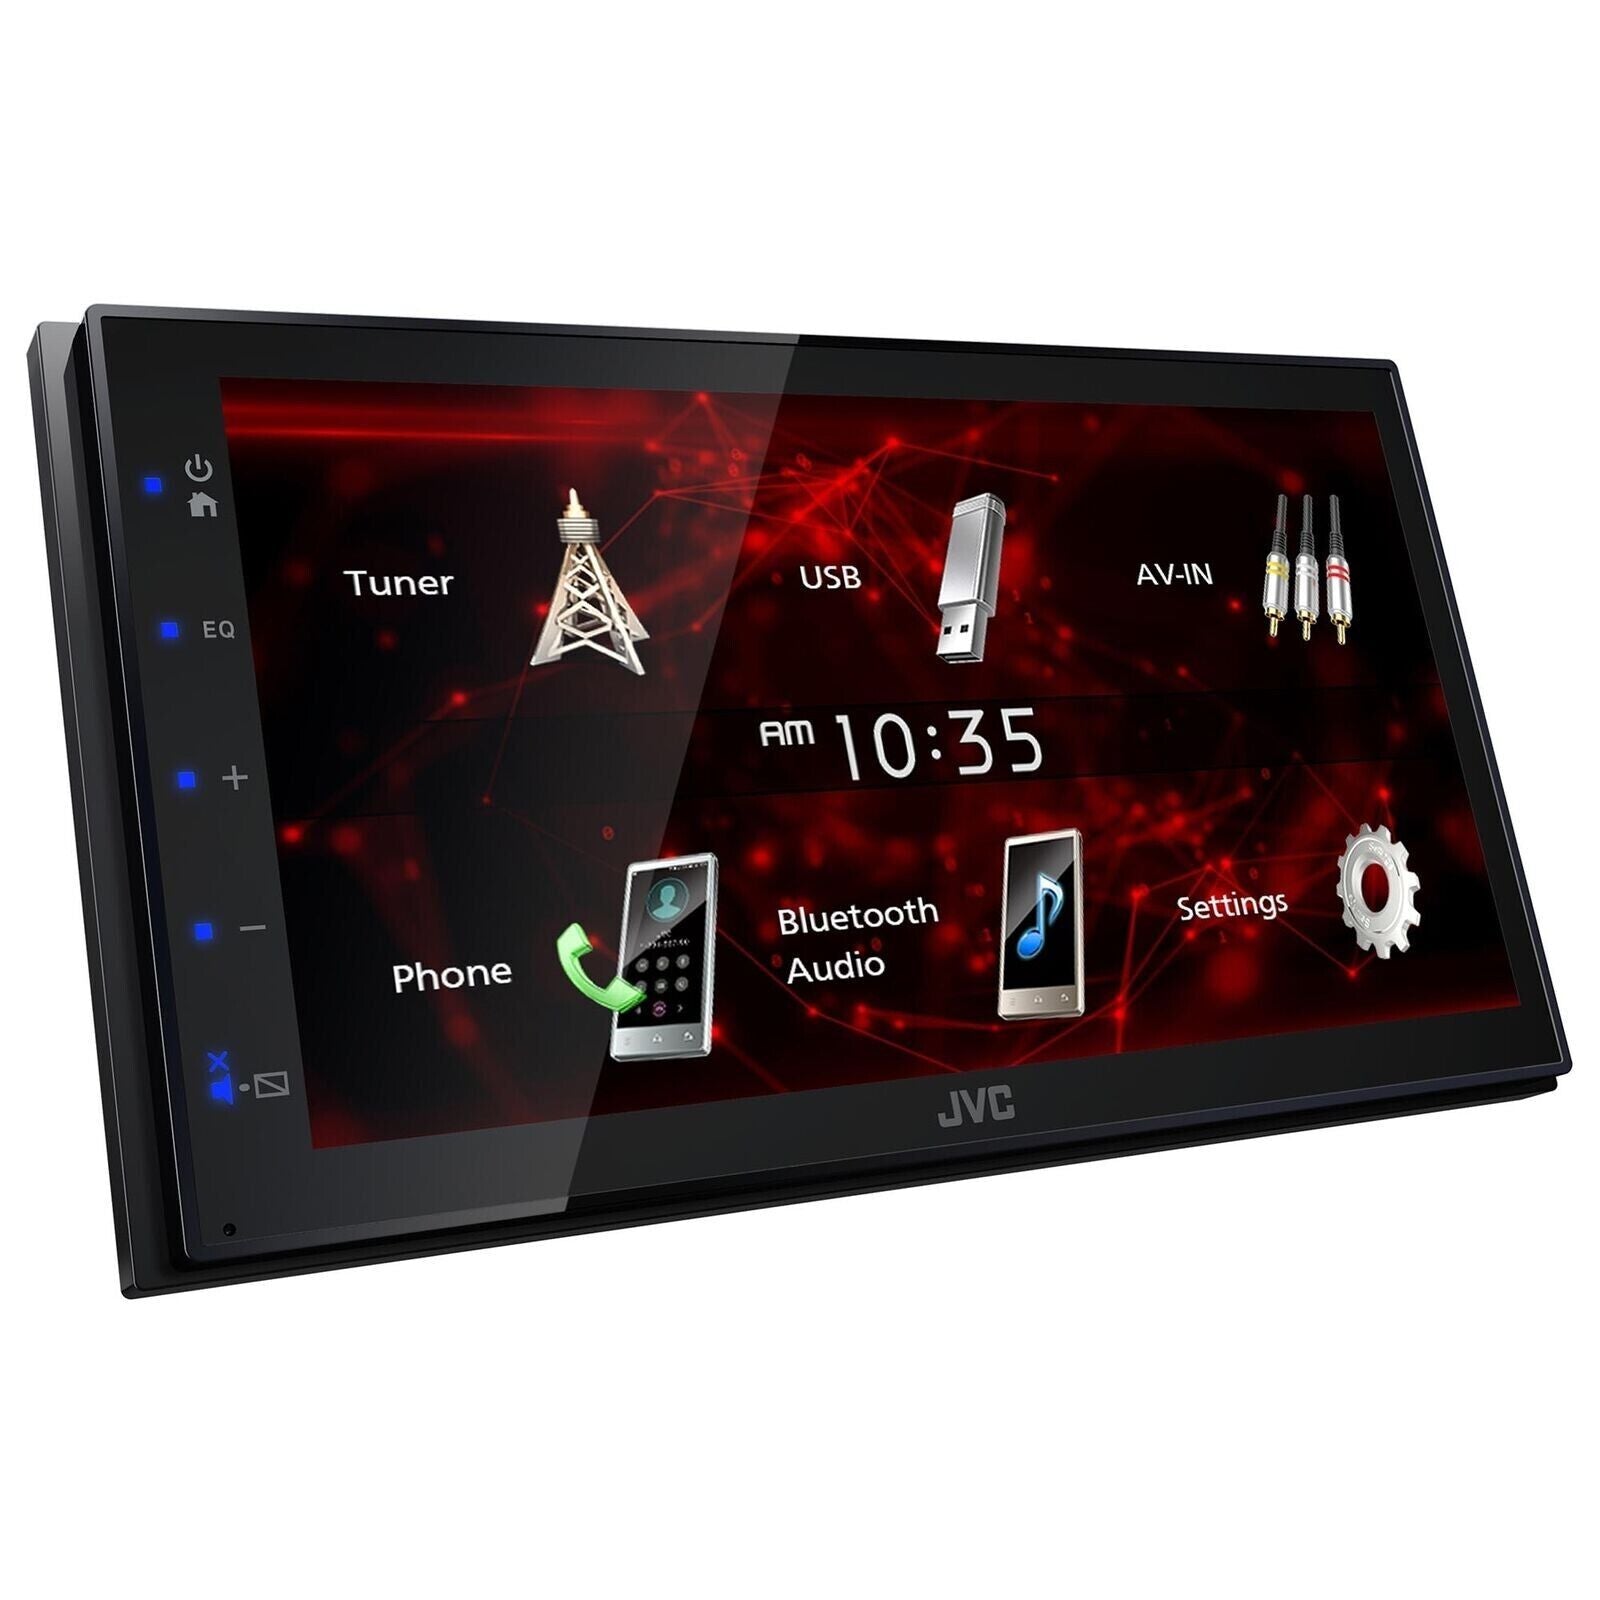 JVC KW-M180BT 2 DIN 6.75" Media Player USB Mirroring For Android Bluetooth + Backup Camera